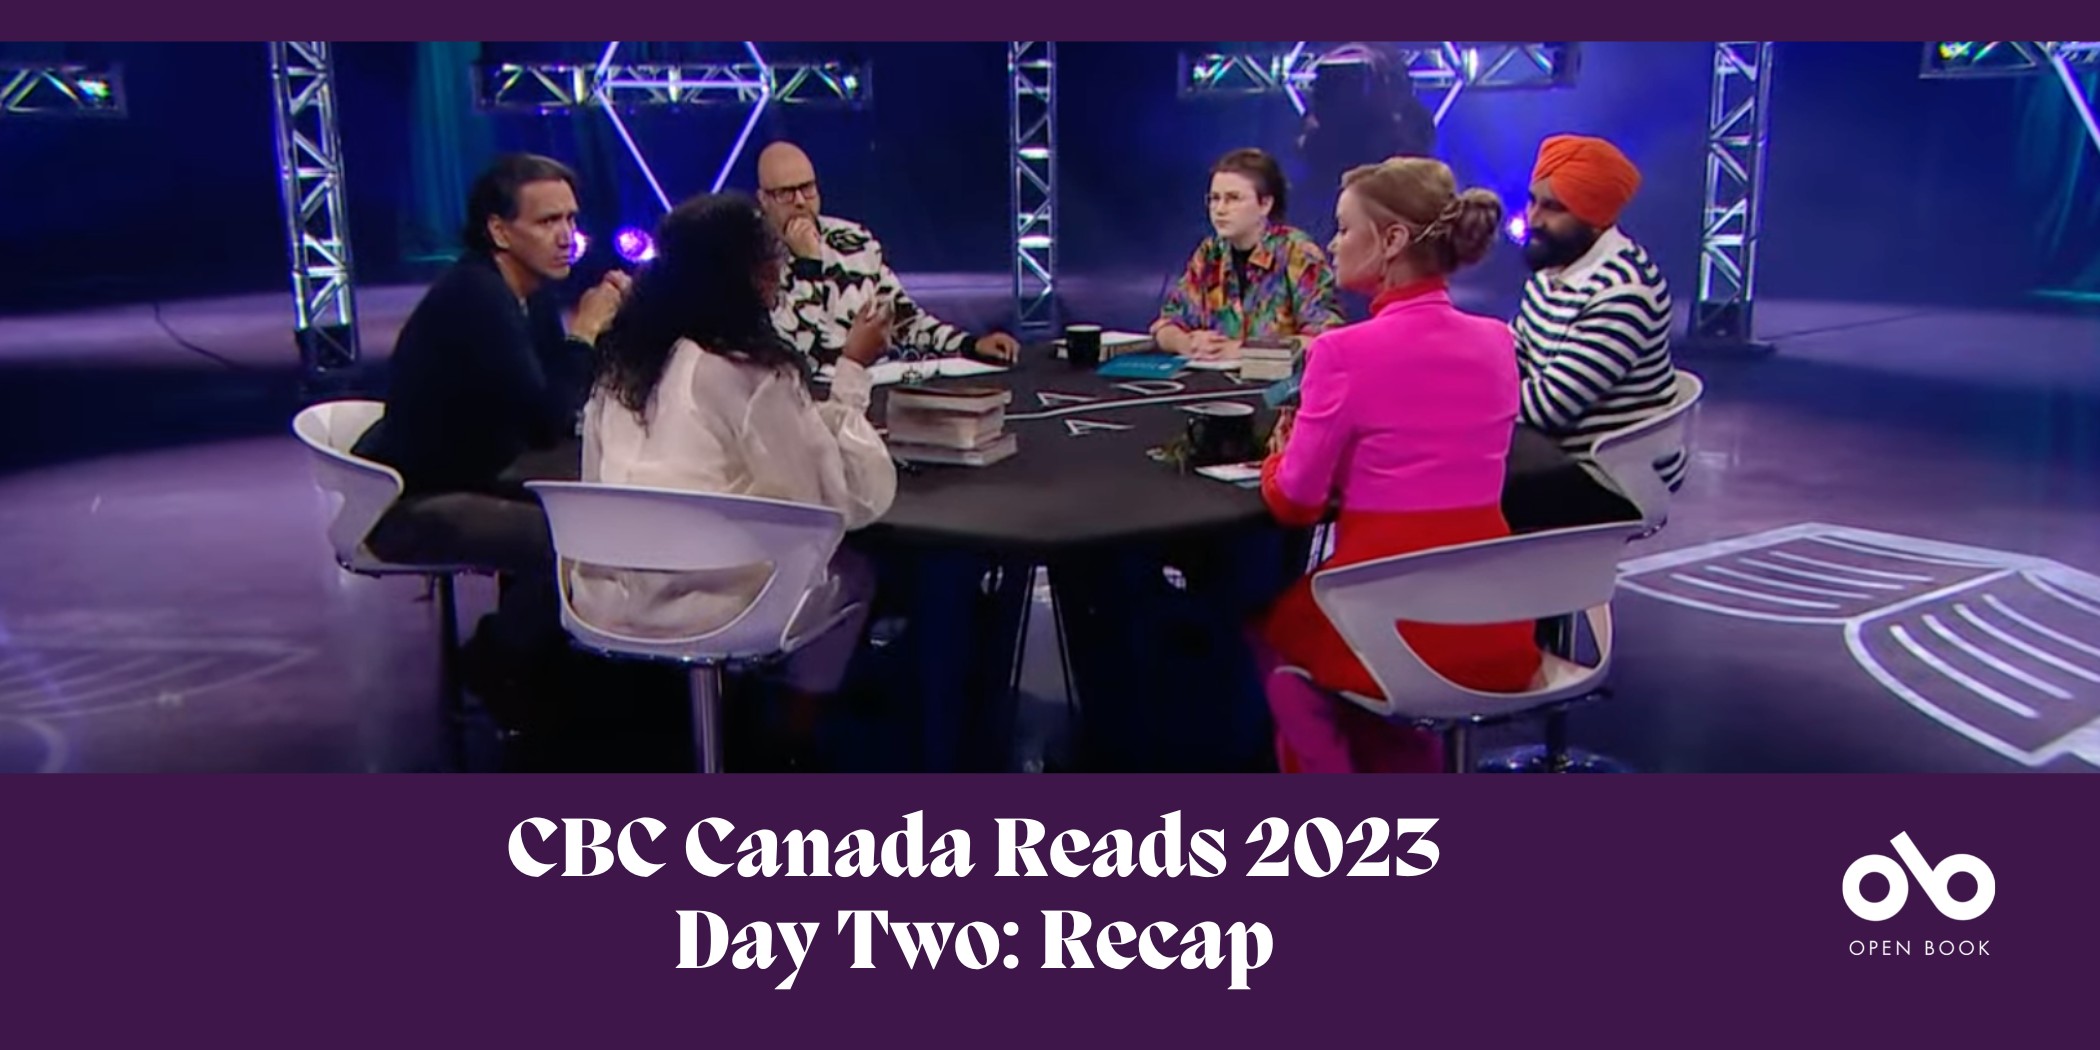 purple banner image with photo of the five Canada Reads 2023 panellists and host Ali Hassan seated around a table. Text below reads "CBC Canada Reads 2023: Day Two Recap"